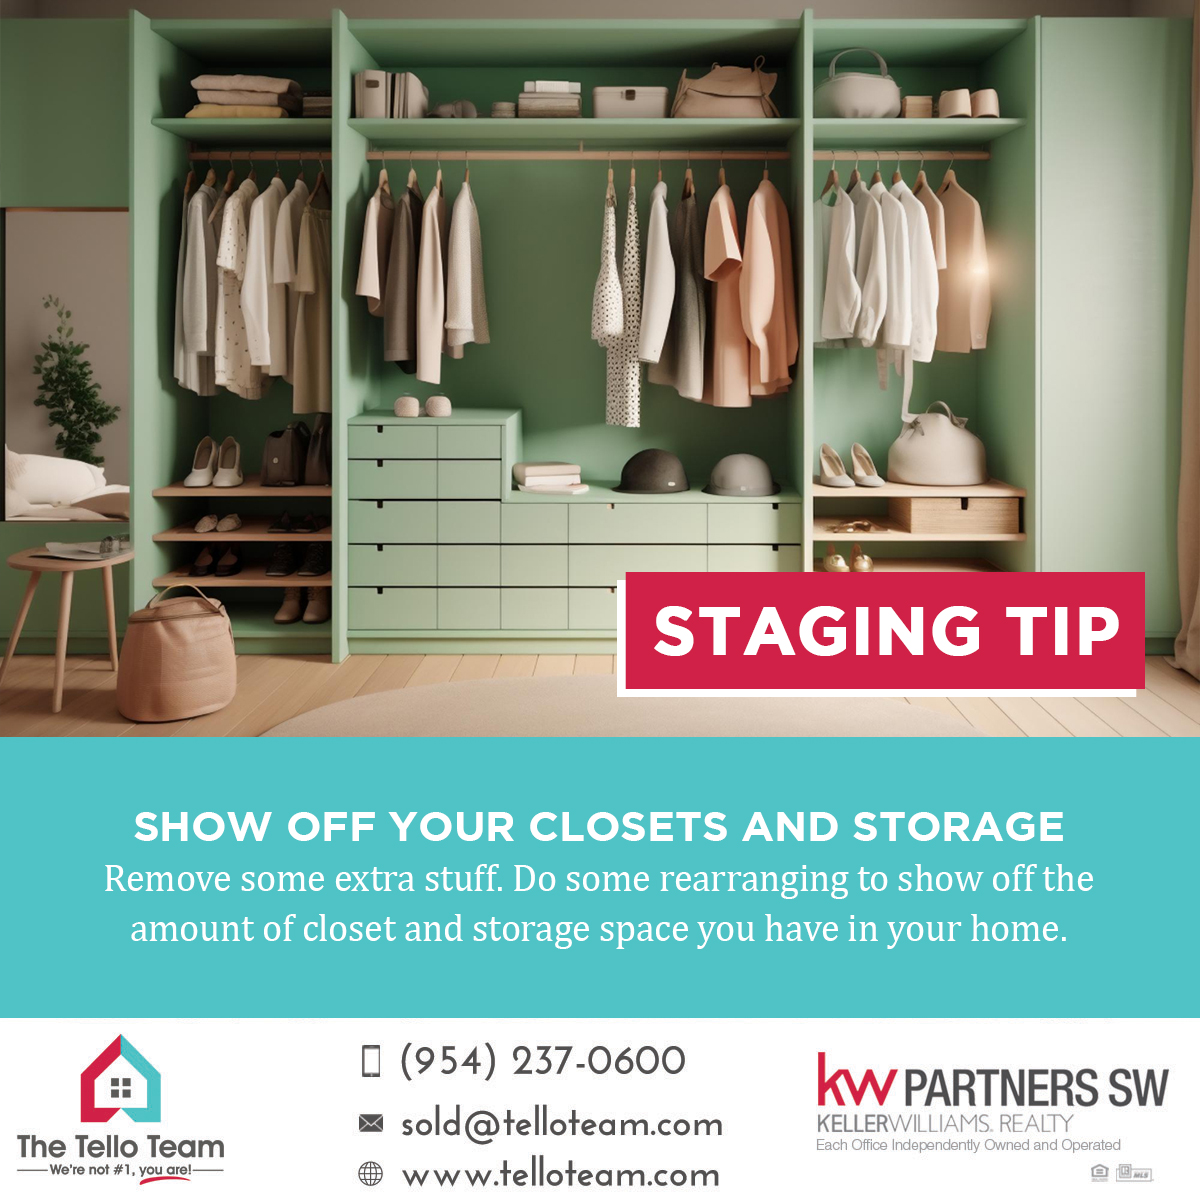 #StagingTip Show off your closets and storage

Looking to sell your home? 📲+1 954-237-0600

#stagingsells #stagingtips #stagetosell #realestatebroker #realestatemiami #realestateflorida #floridarealtor #floridarealtors #floridarealestate #floridarealestateagent